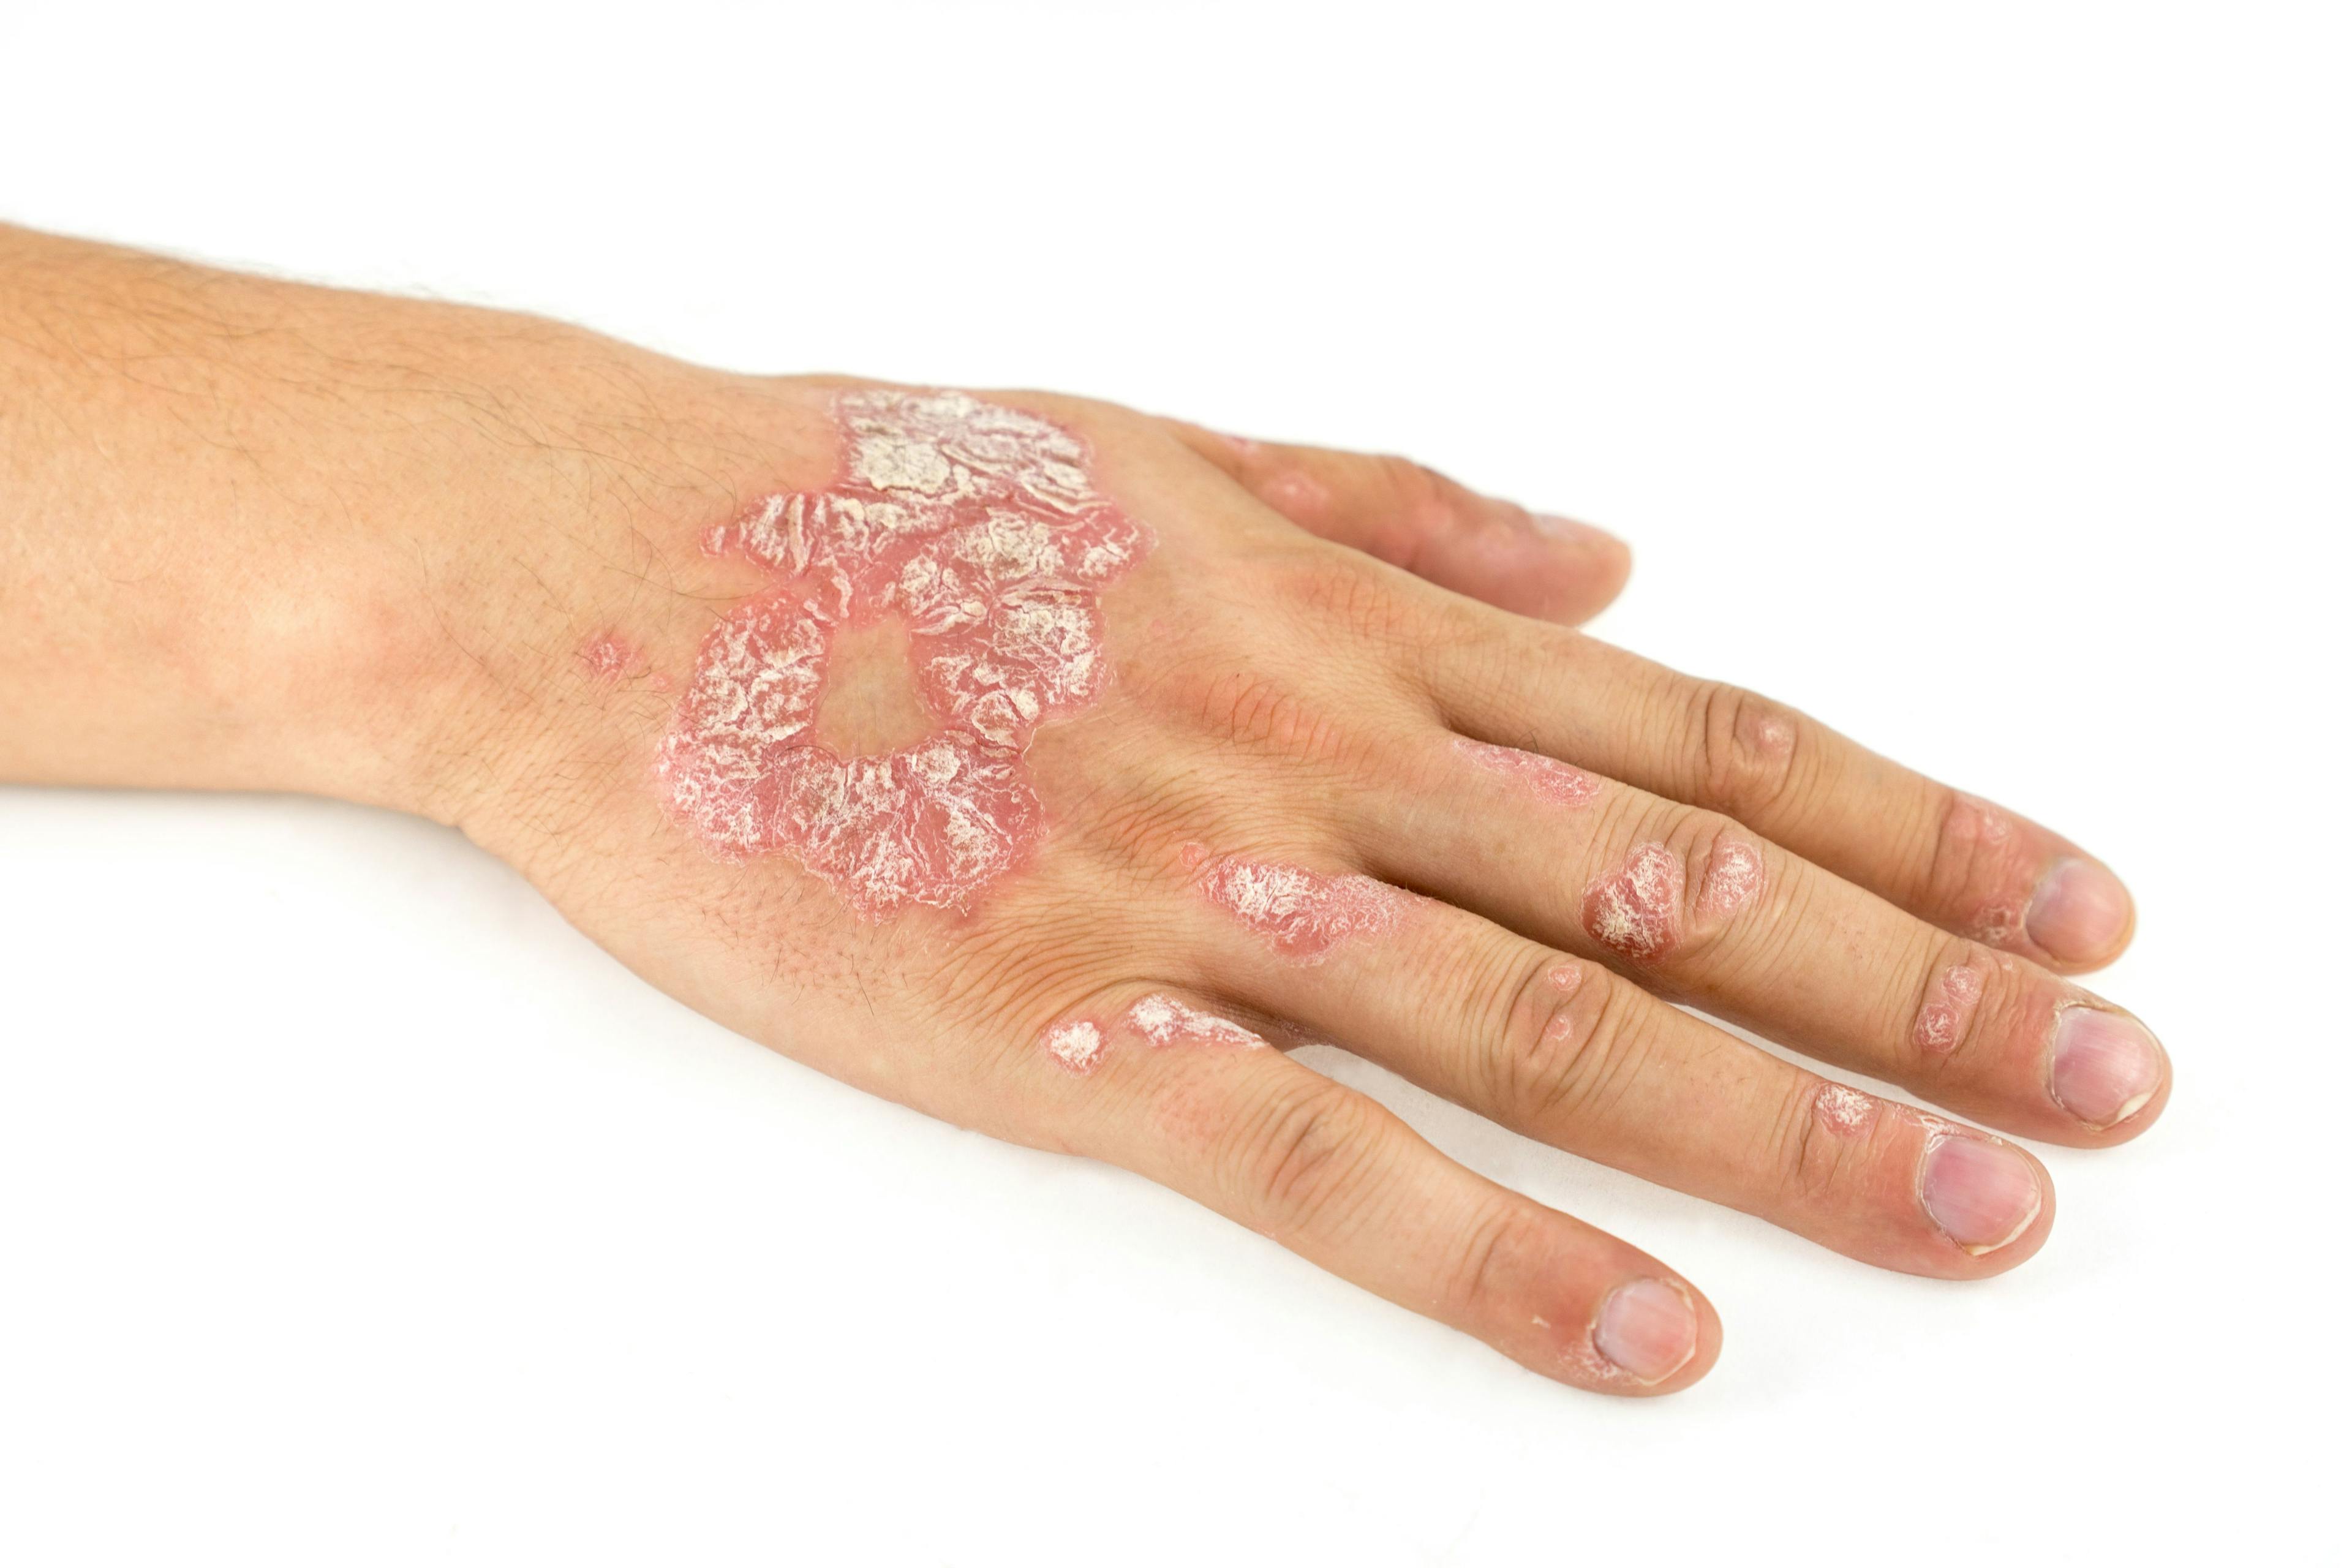 Spesolimab Effective in Treating Generalized Pustular Psoriasis Flares